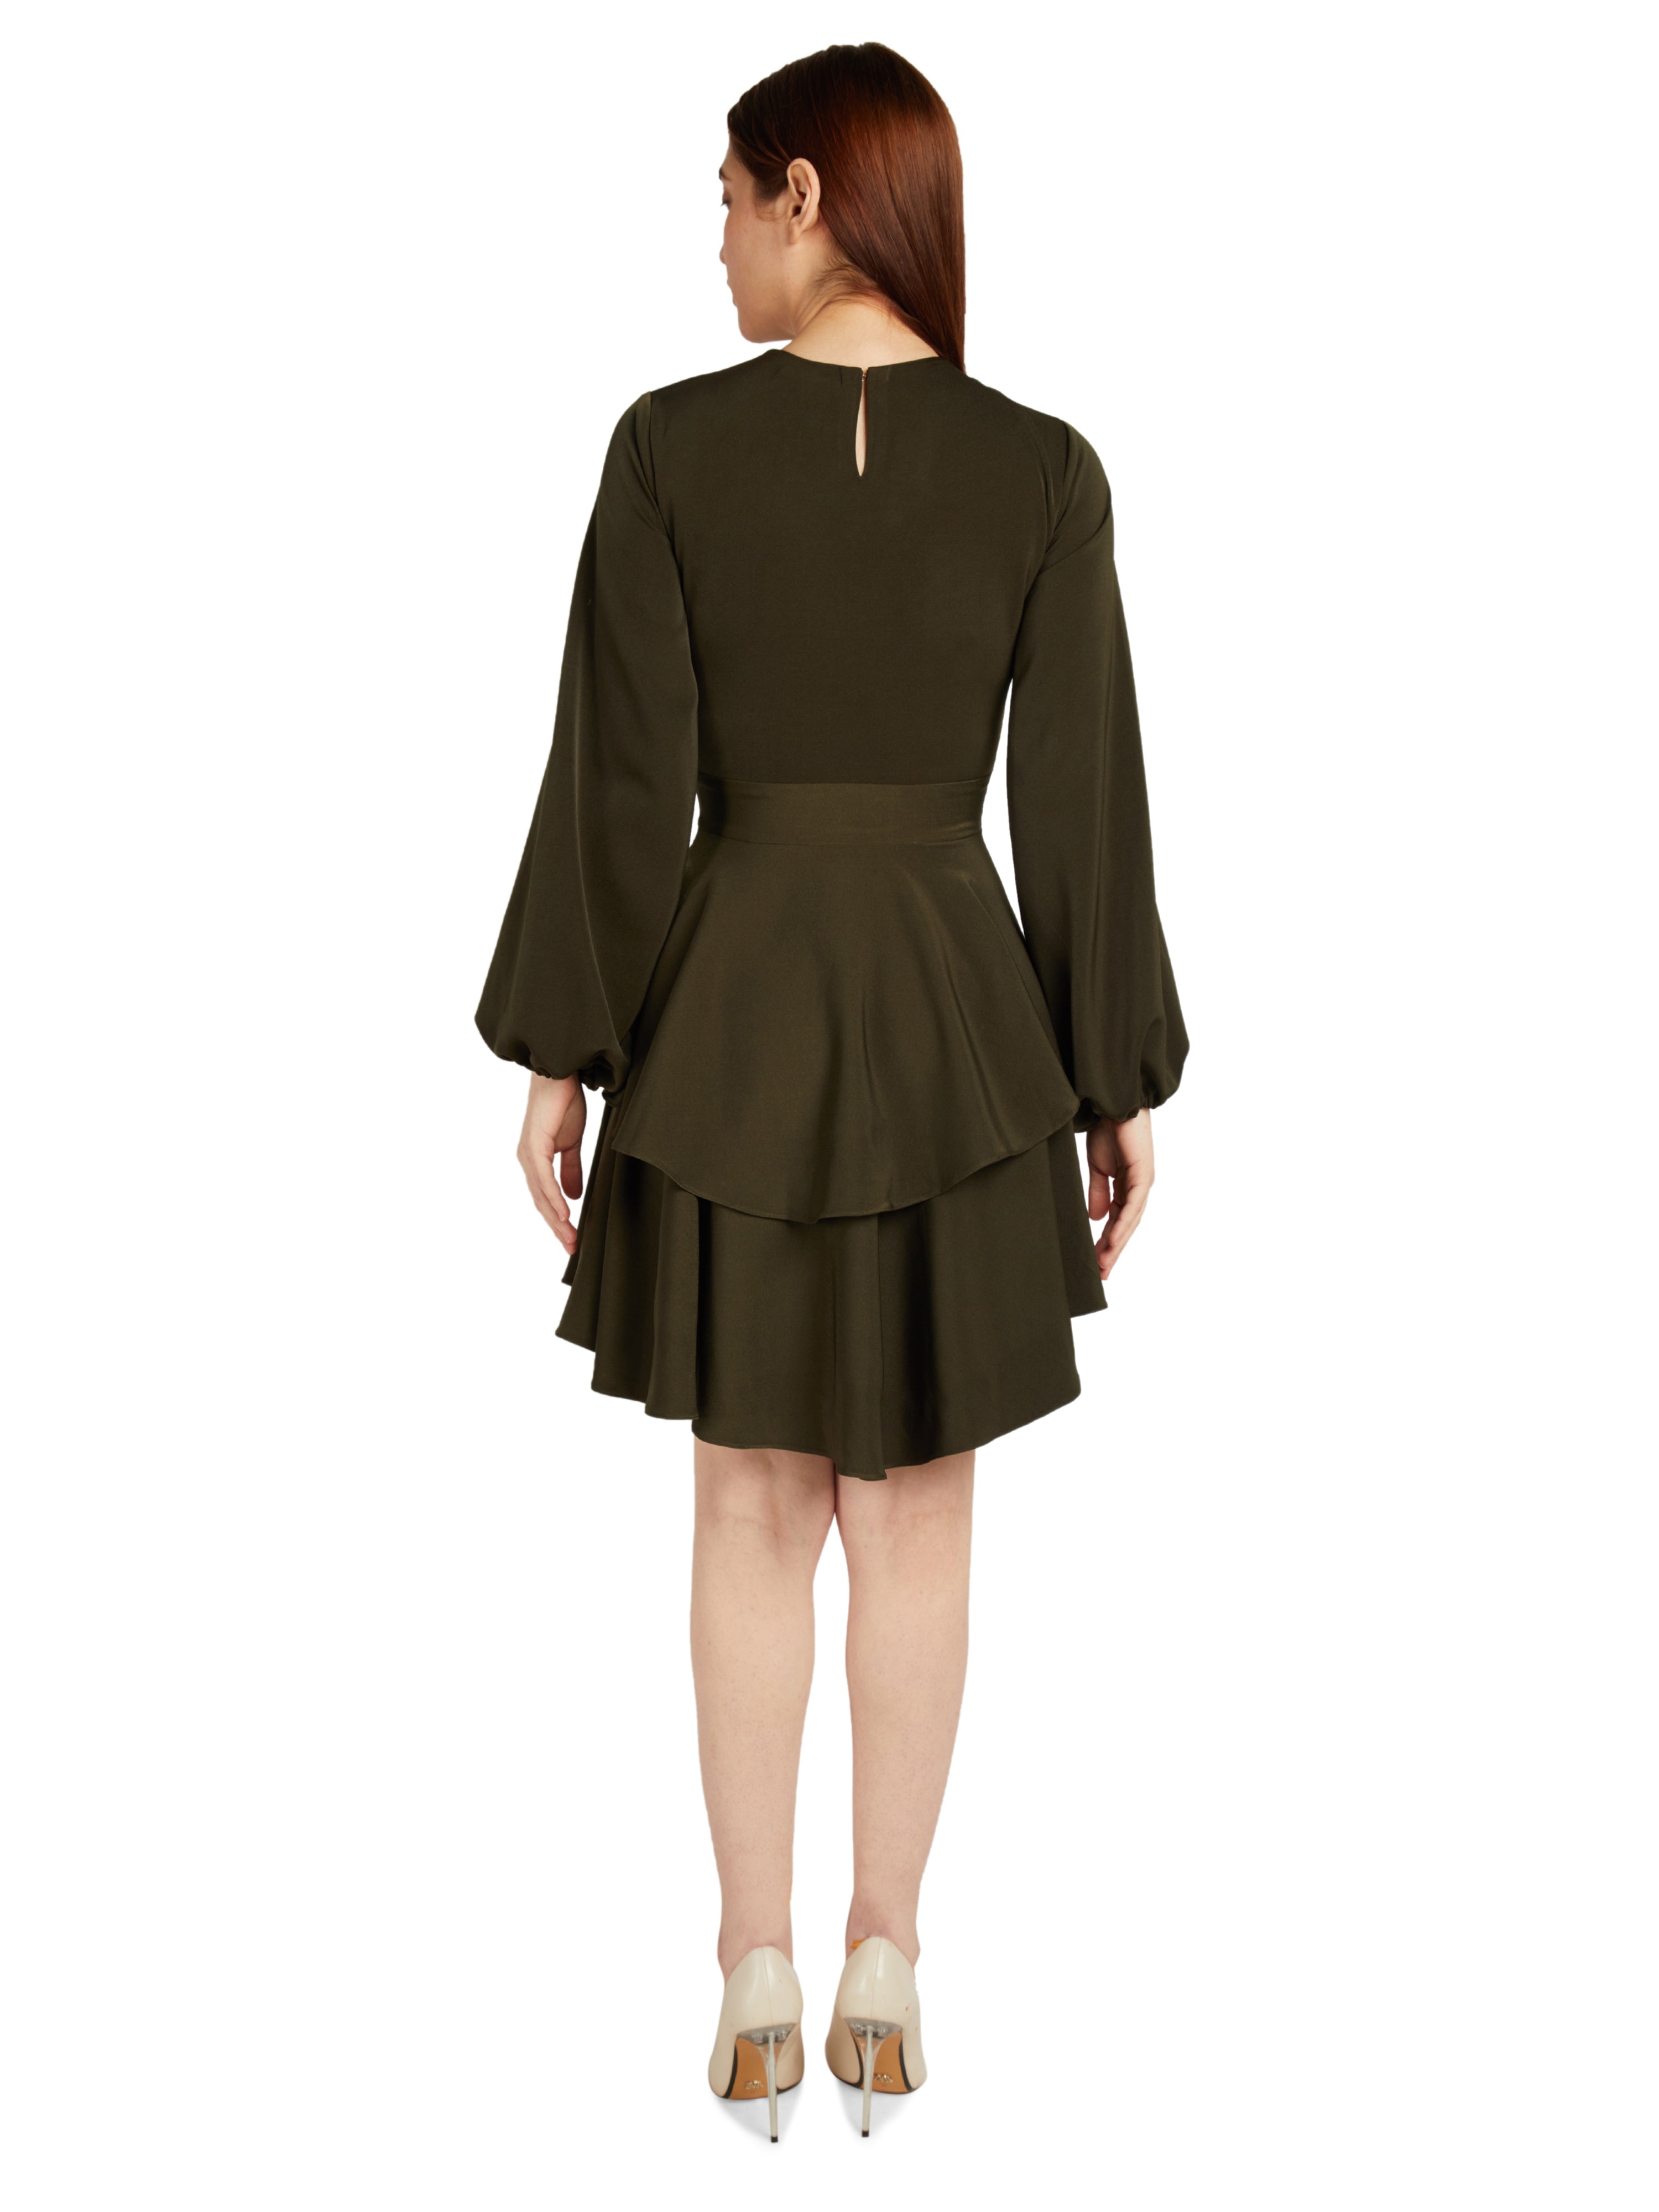 FULL SLEEVE FIT AND FLARE DRESS WITH LAYER DETAIL